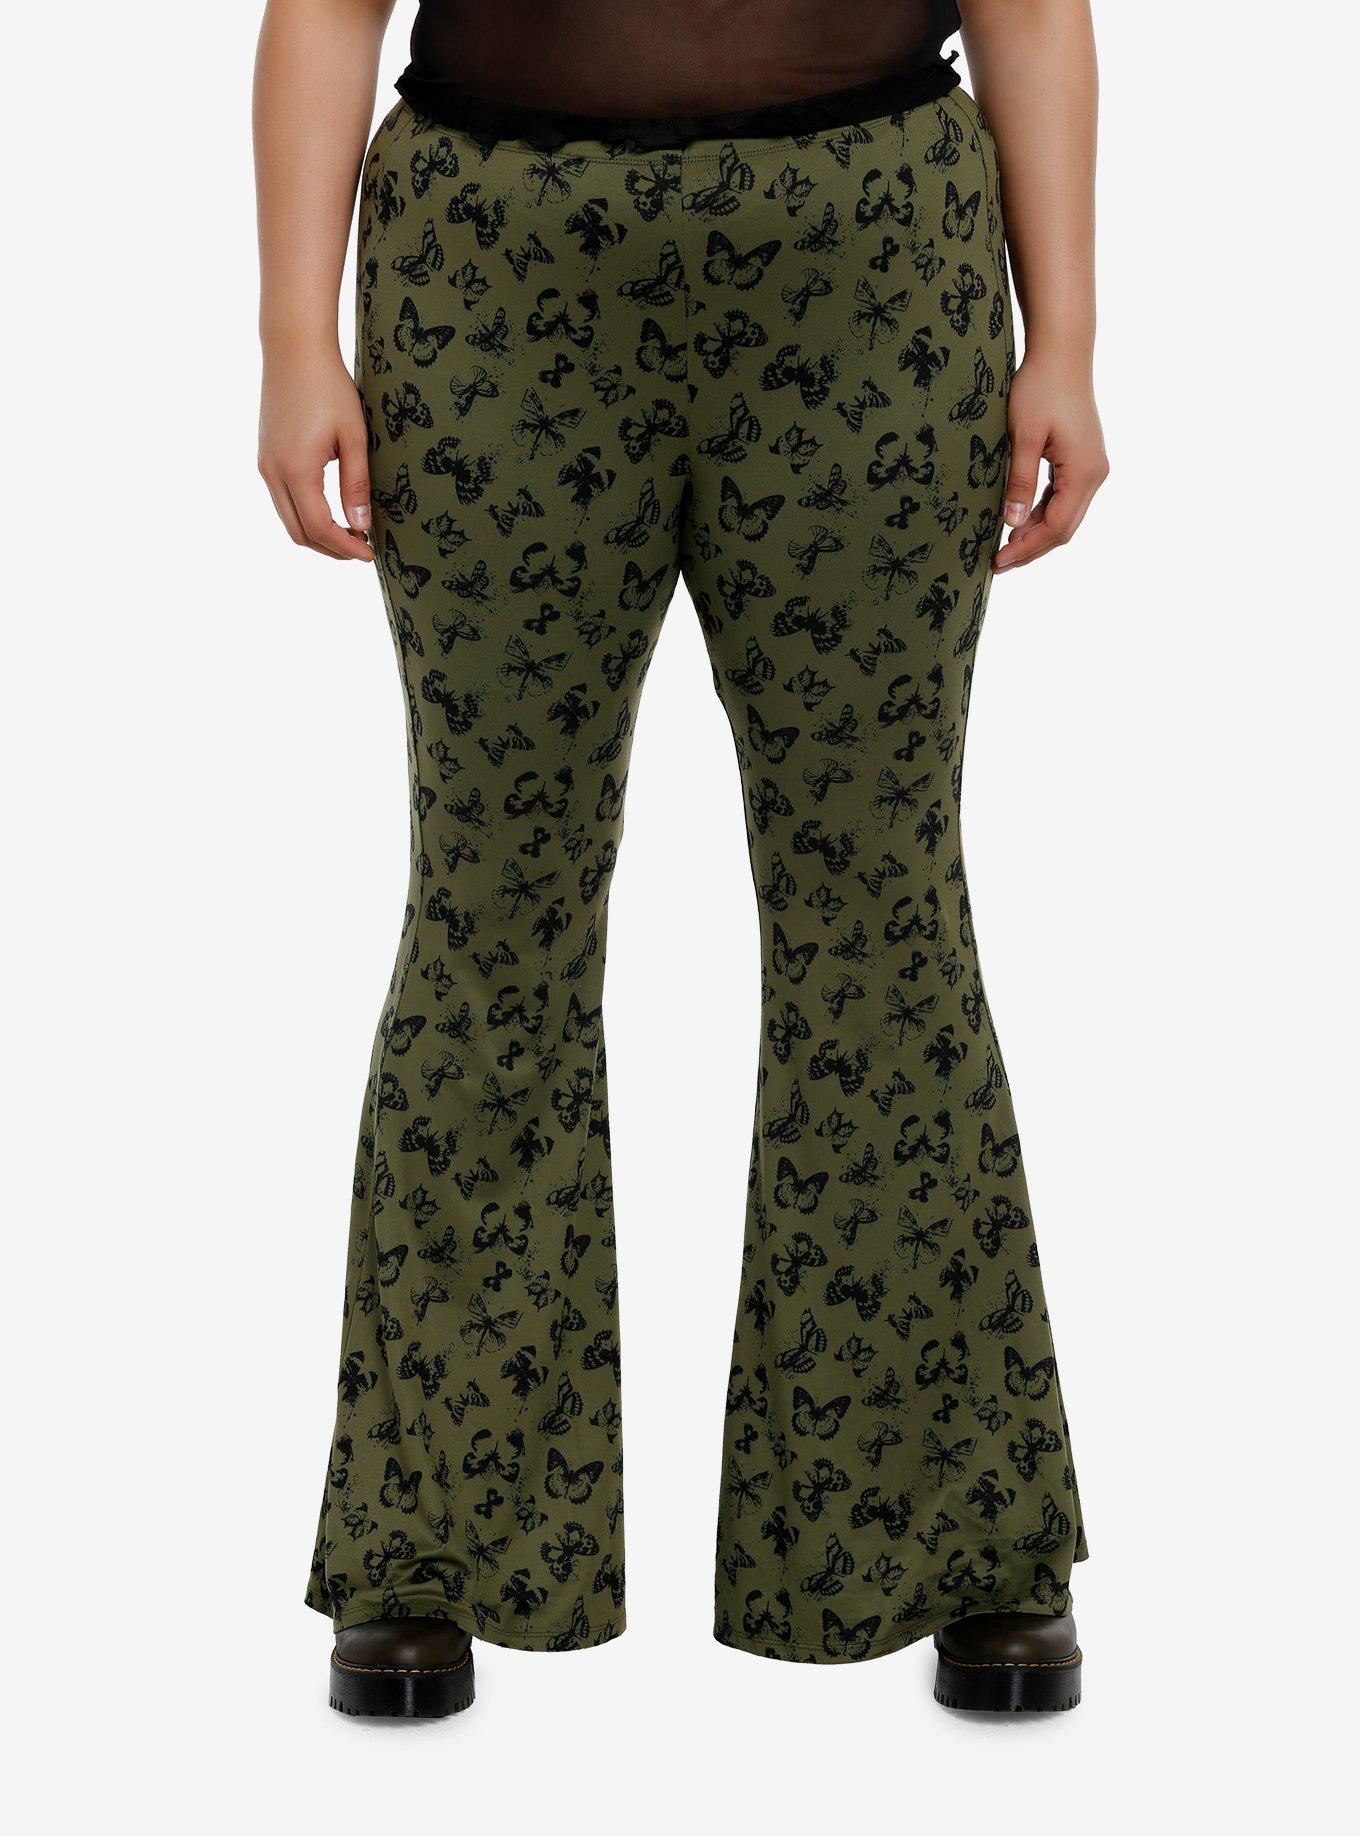 Thorn & Fable Green & Black Butterfly Flare Leggings Plus Size